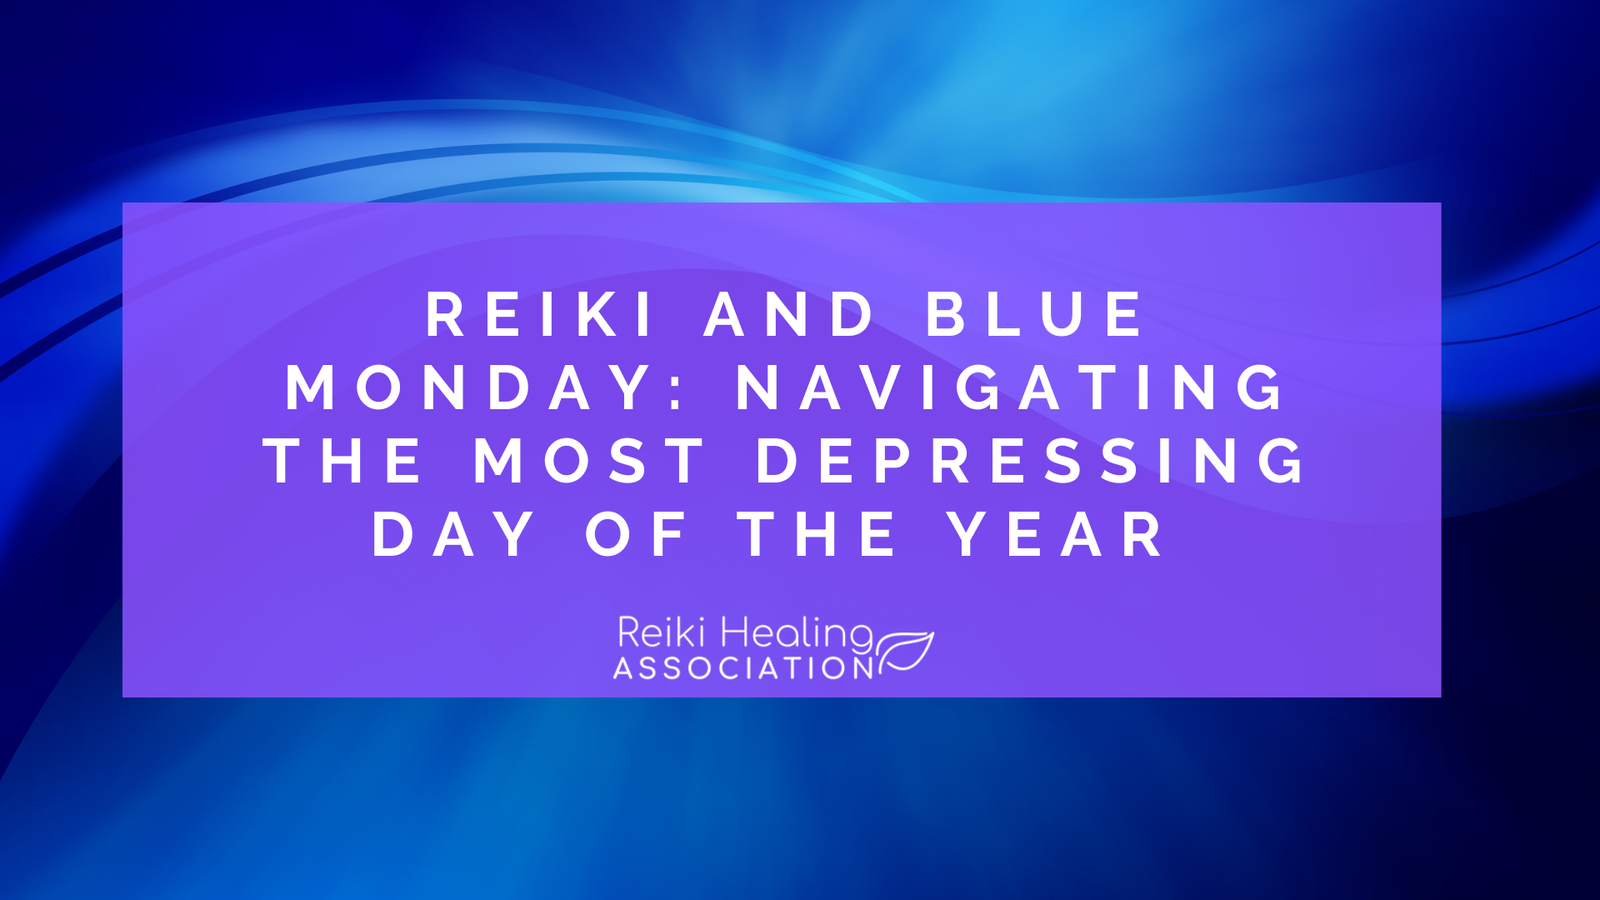 Reiki and Blue Monday: Navigating the Most Depressing Day of the Year